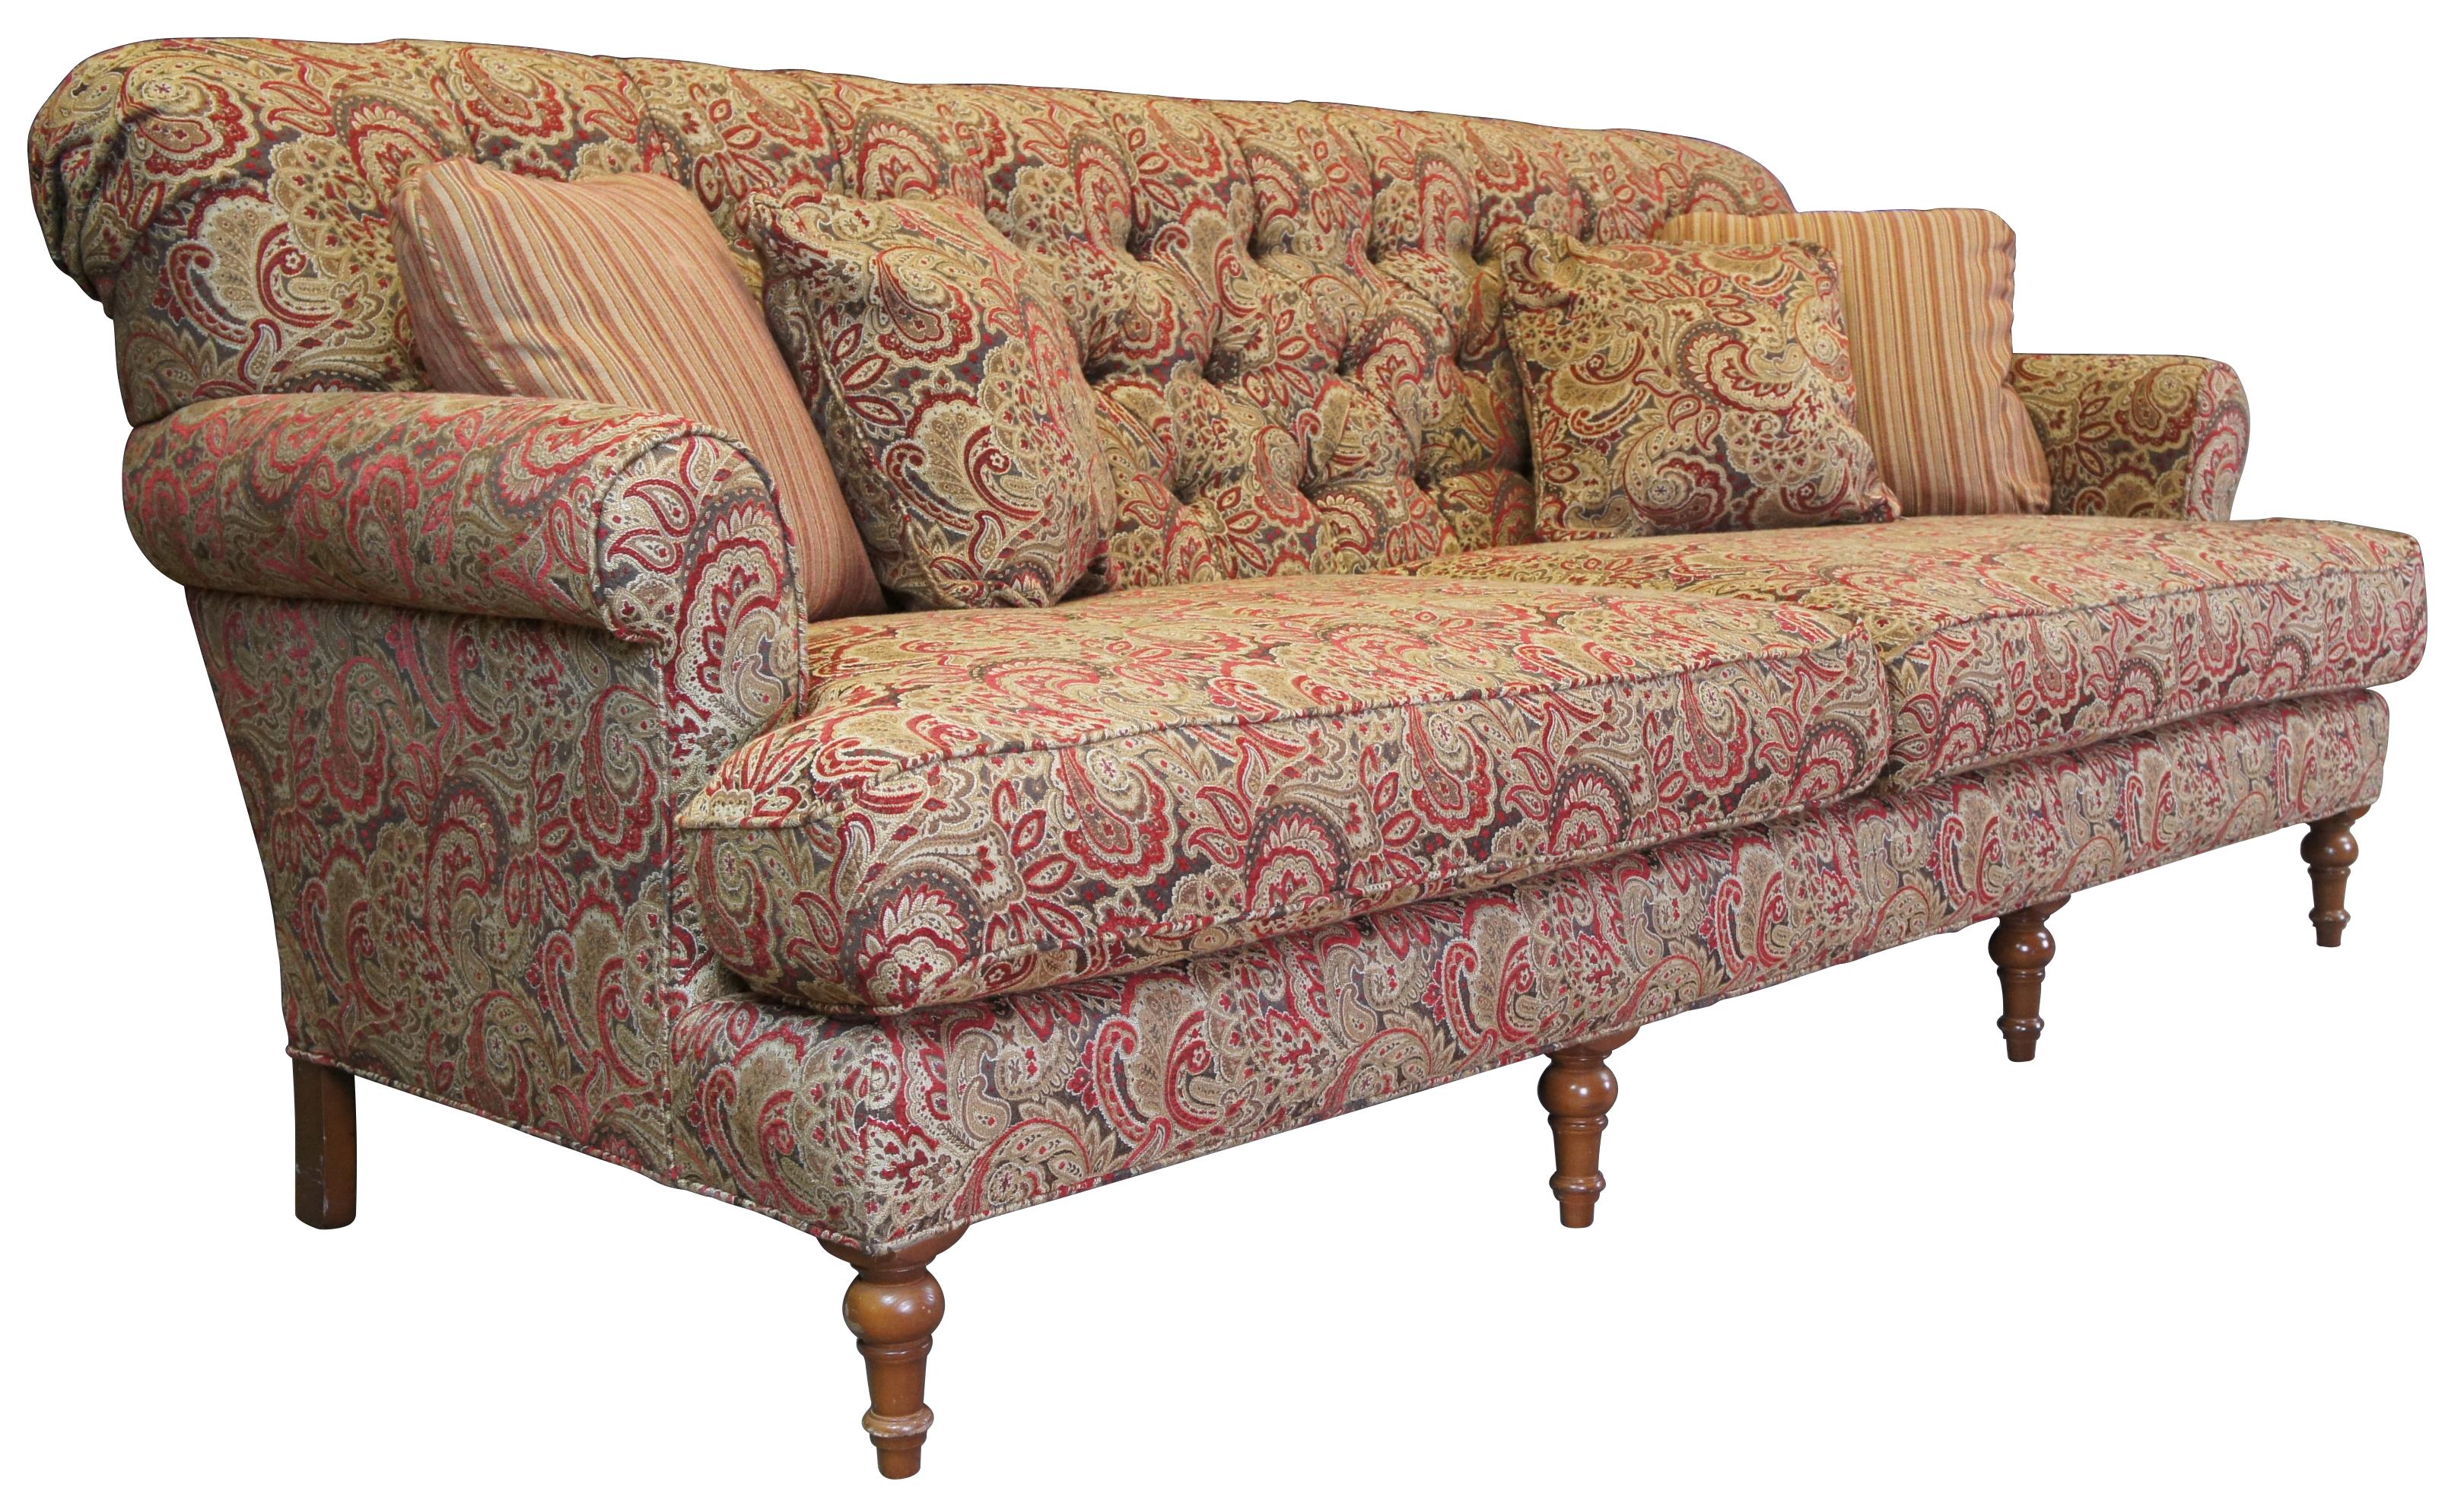 Vintage Arhaus Cambridge Collection sofa or couch featuring a tufted paisley upholstery and rolled arms. Includes four throw pillows.

 Measures: 97